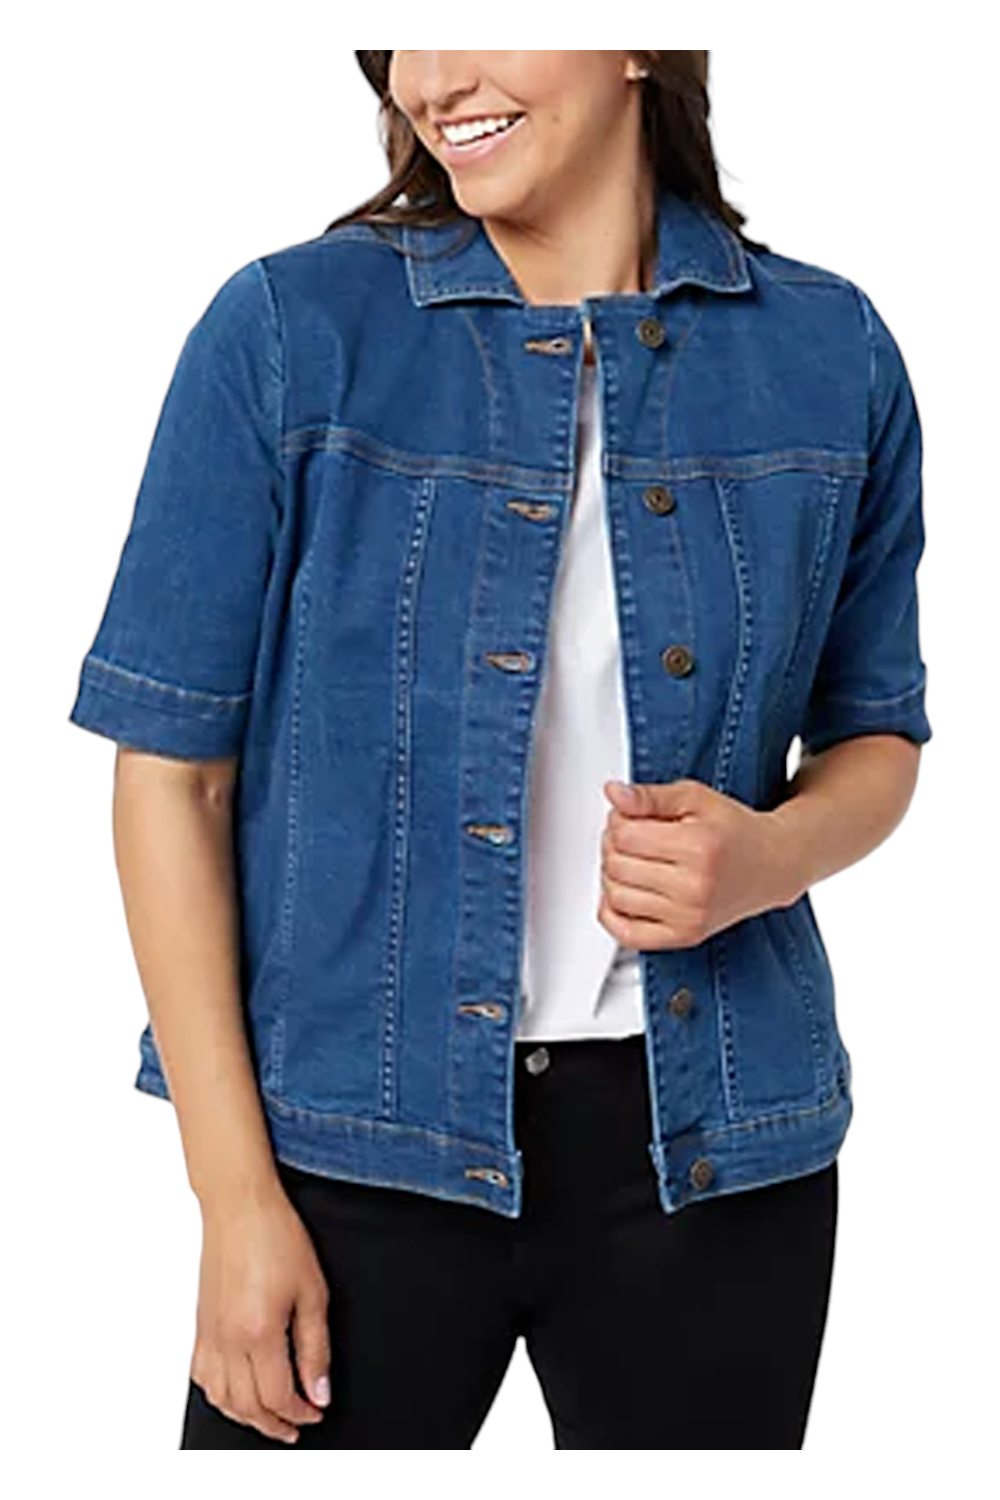 Open Elbow Jacket (COPCH36202-WSHED-BLUE)